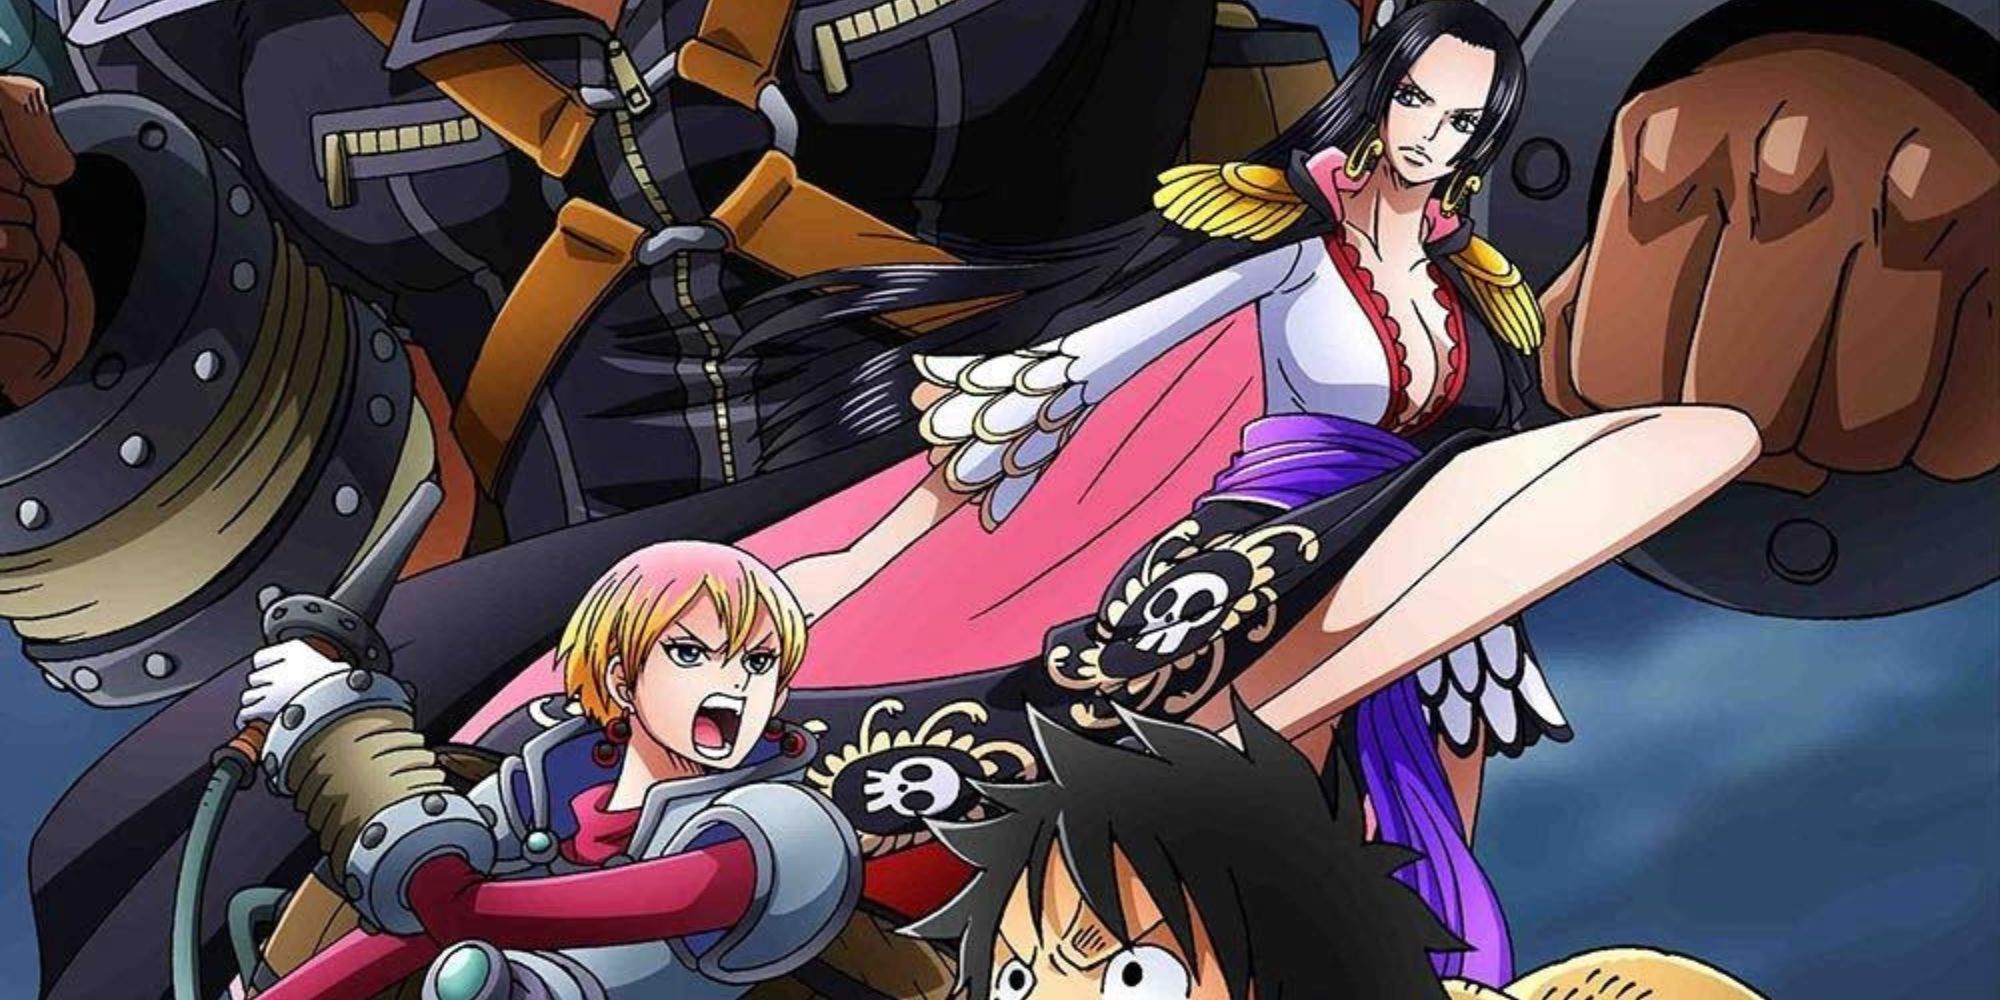 Official promotional art of the Cidre Guild arc, with Luffy, Boa Hancock and Guarana.